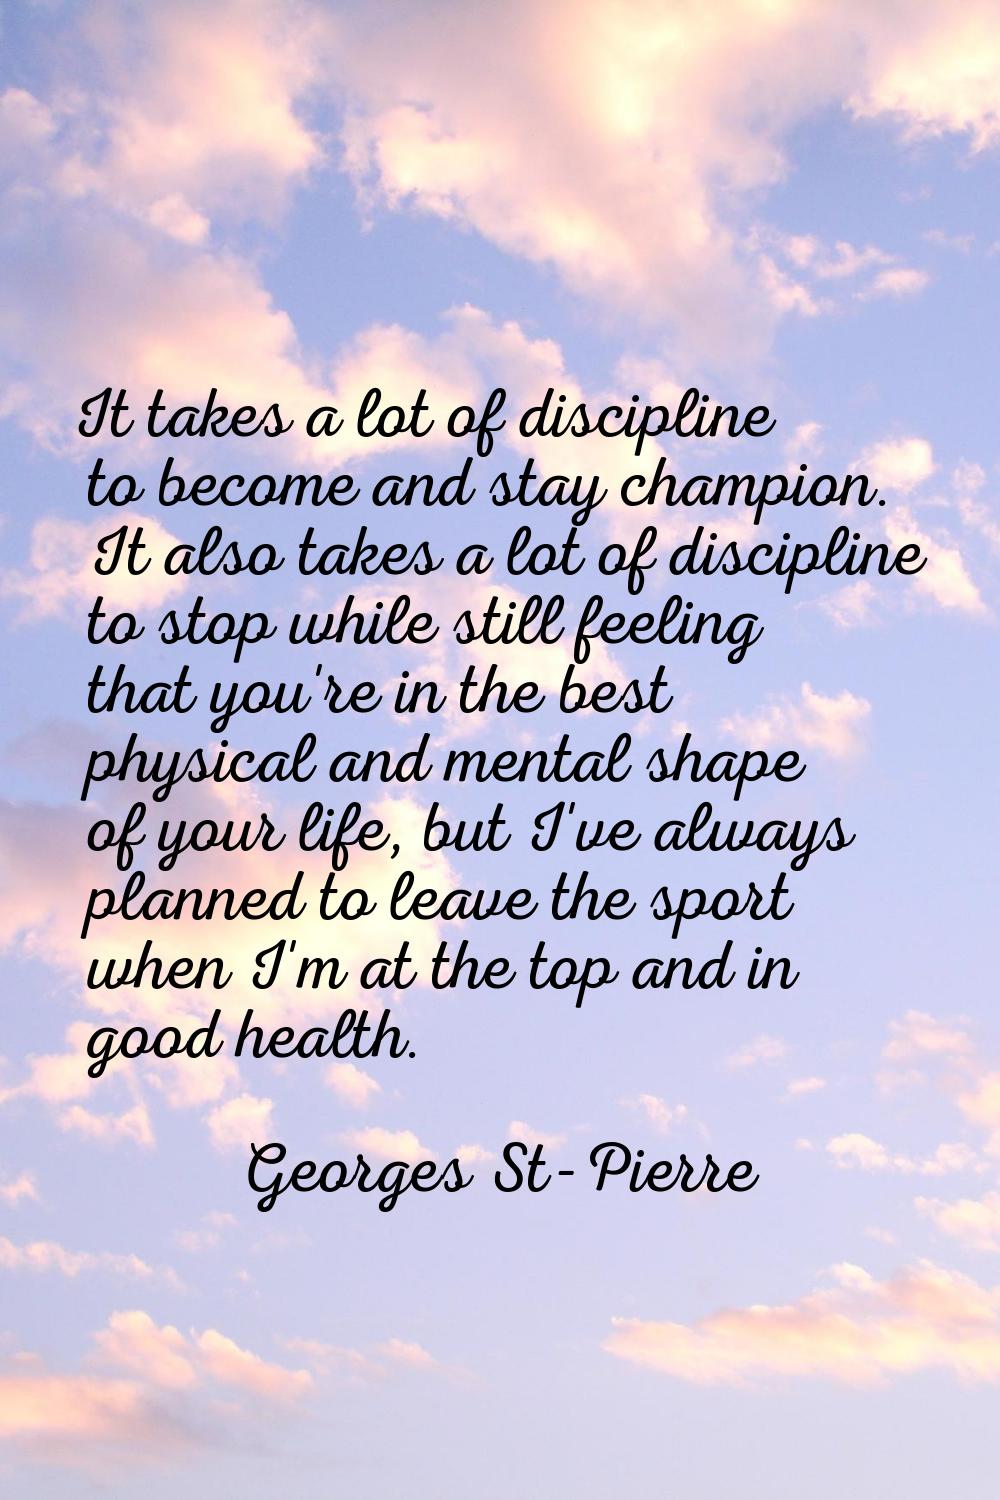 It takes a lot of discipline to become and stay champion. It also takes a lot of discipline to stop